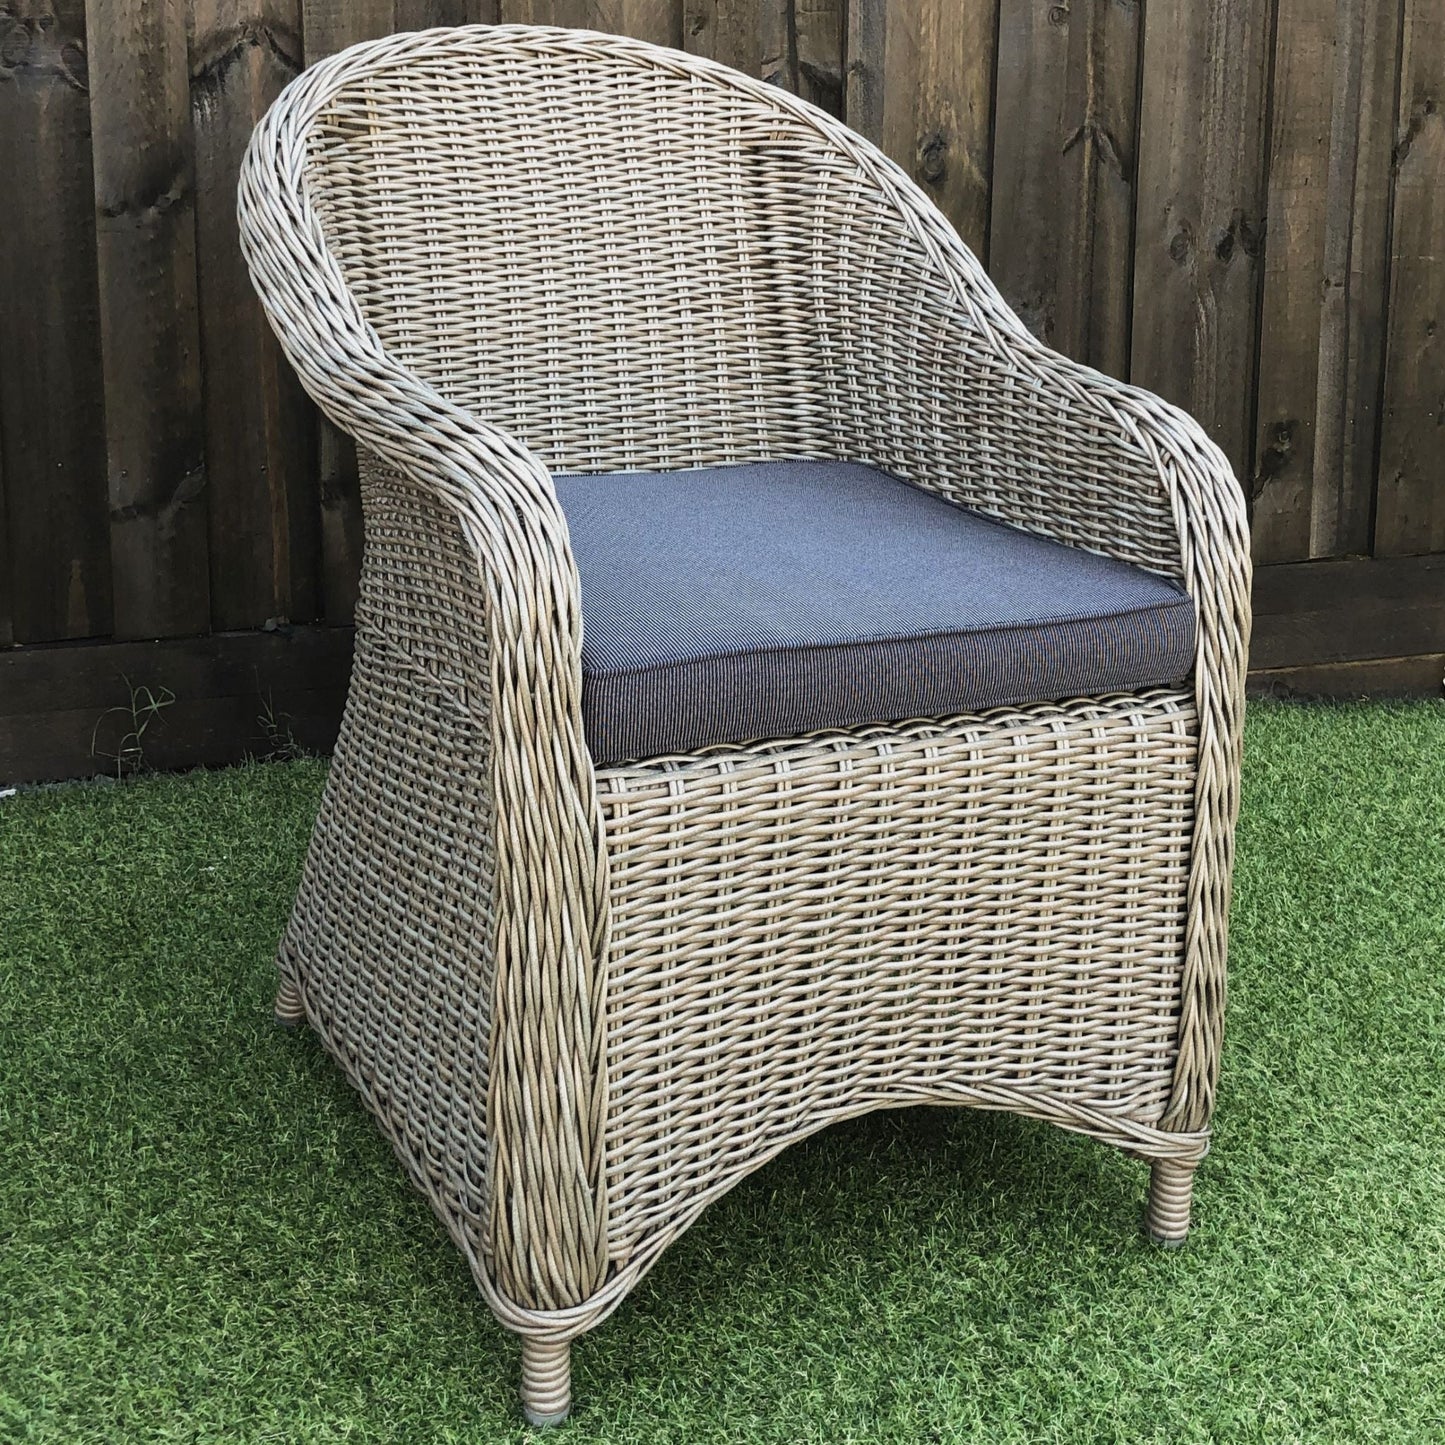 MALAWI 2-Piece Set Poly Rattan Wicker Outdoor Dining Chair - Brown Grey - Direct Factory Furniture Australia